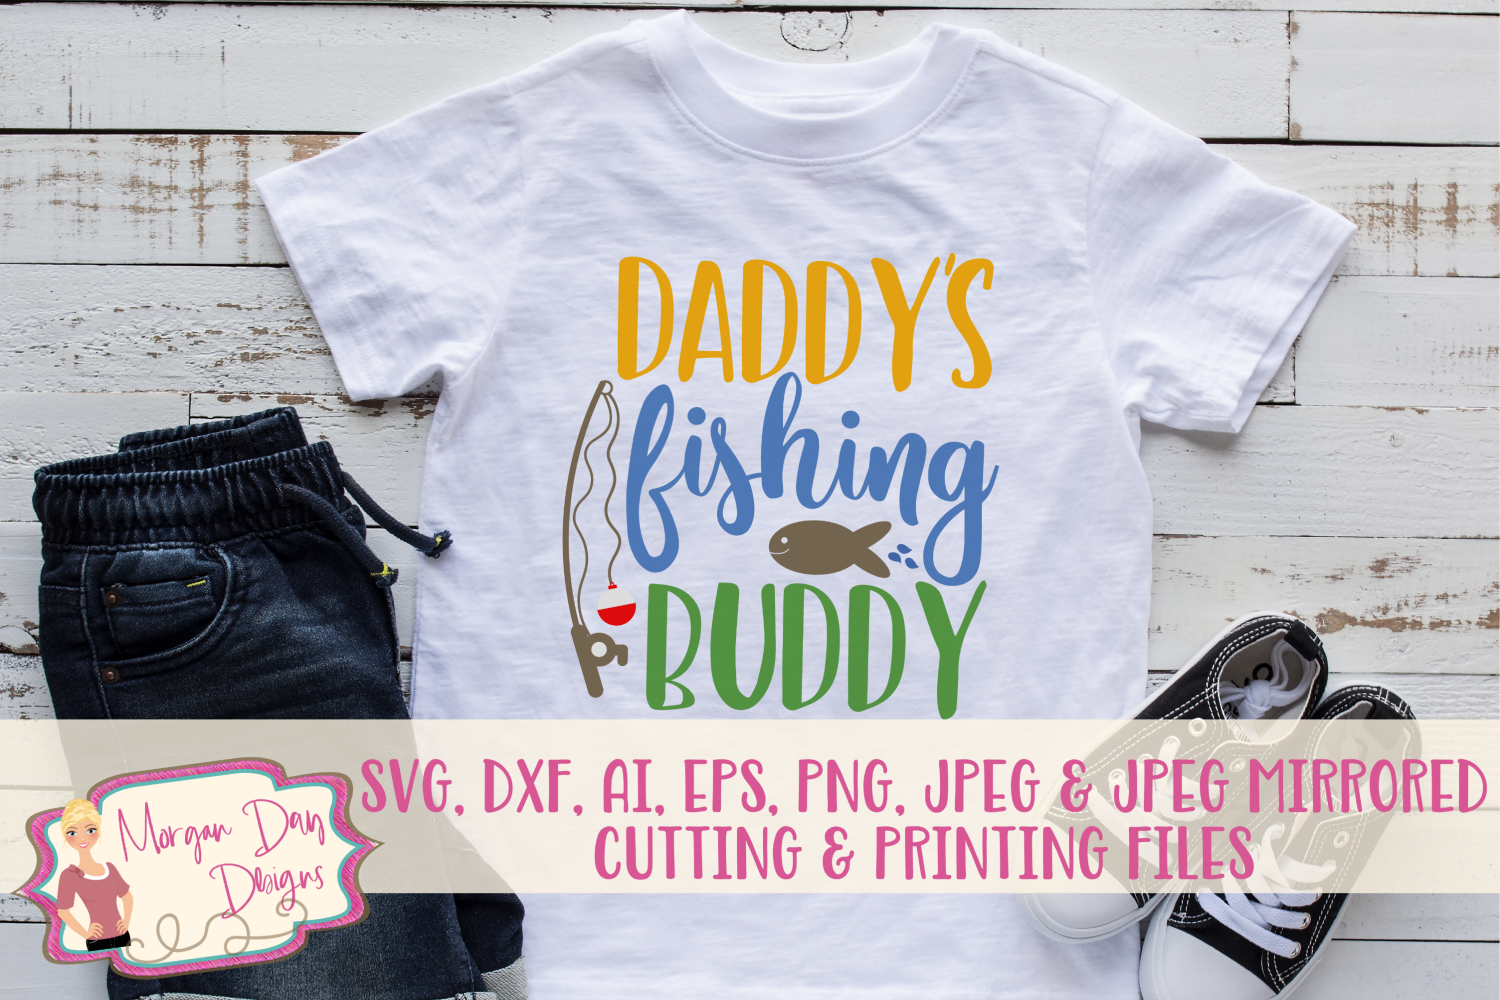 Download Daddy's Fishing Buddy SVG, DXF, AI, EPS, PNG, JPEG